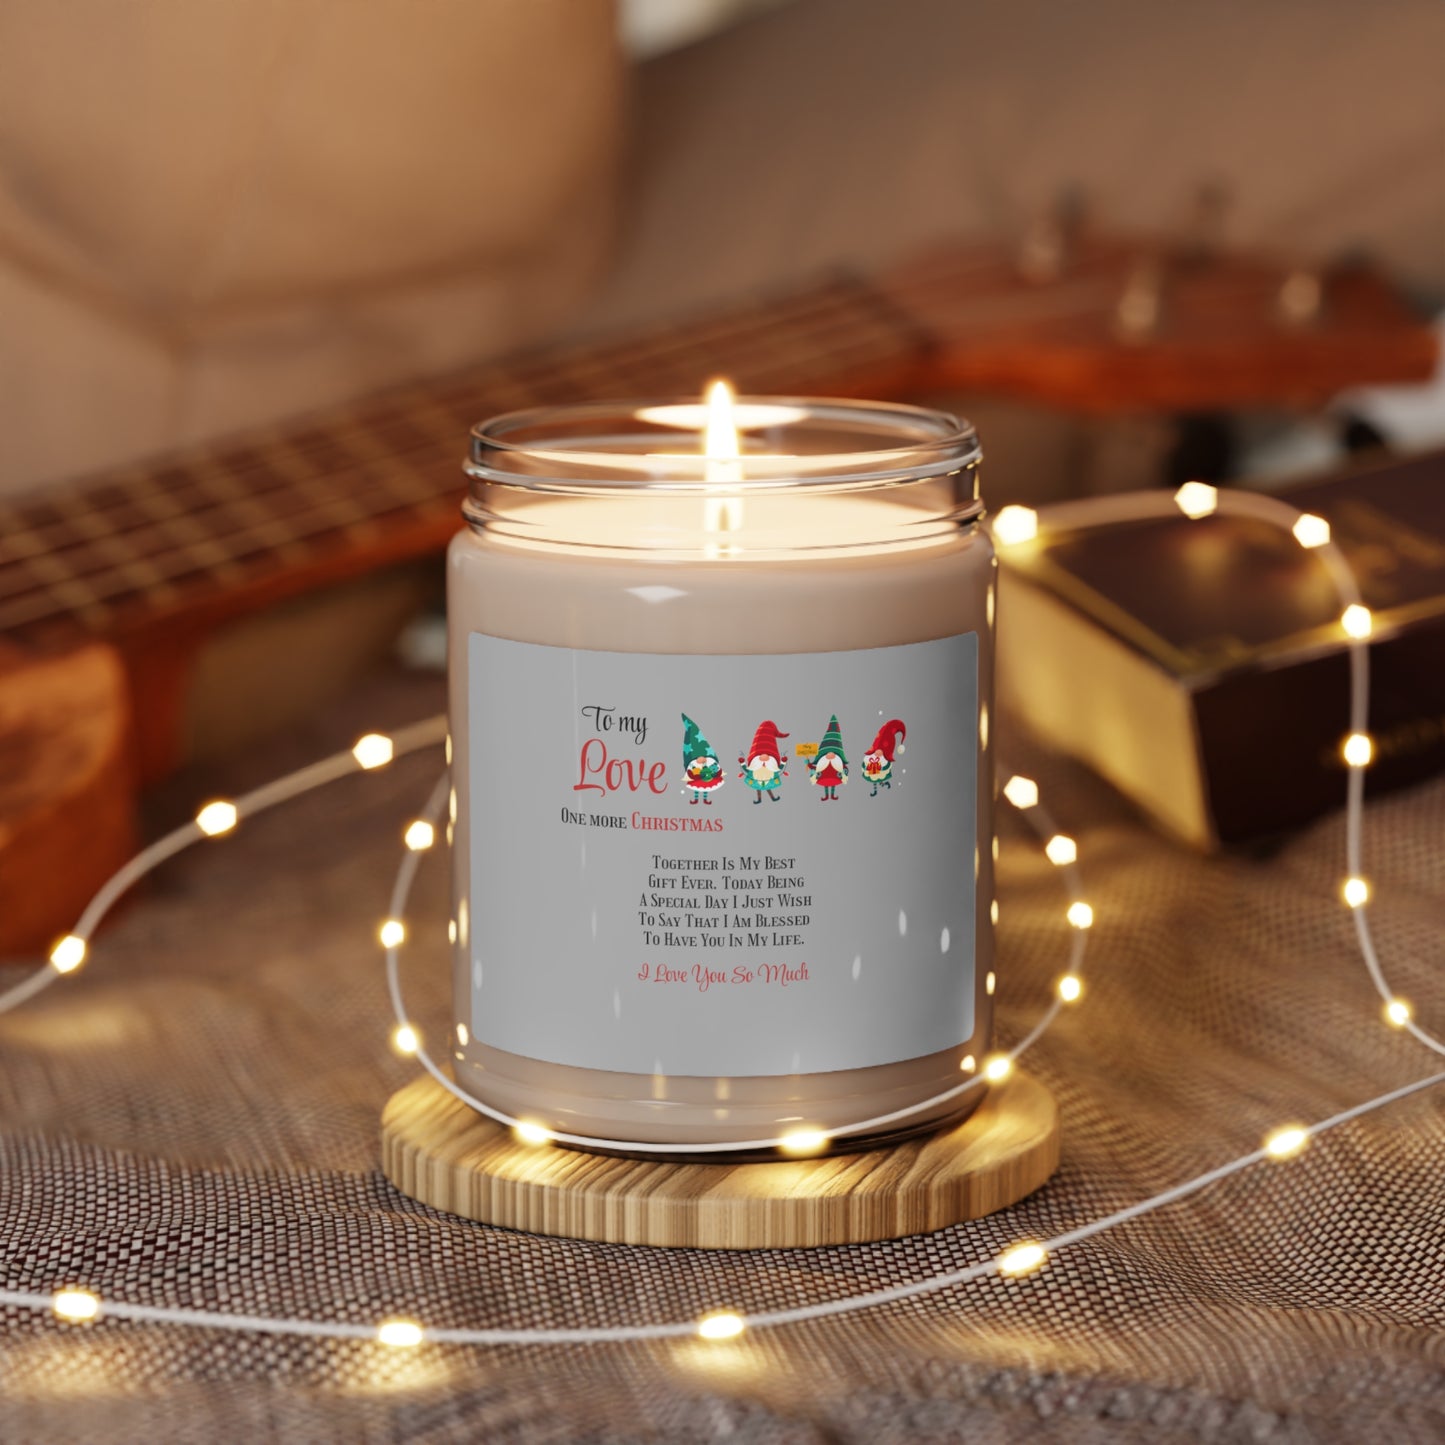 Scented Soy Candle, To my Love One more Christmas together Home-clothes-jewelry